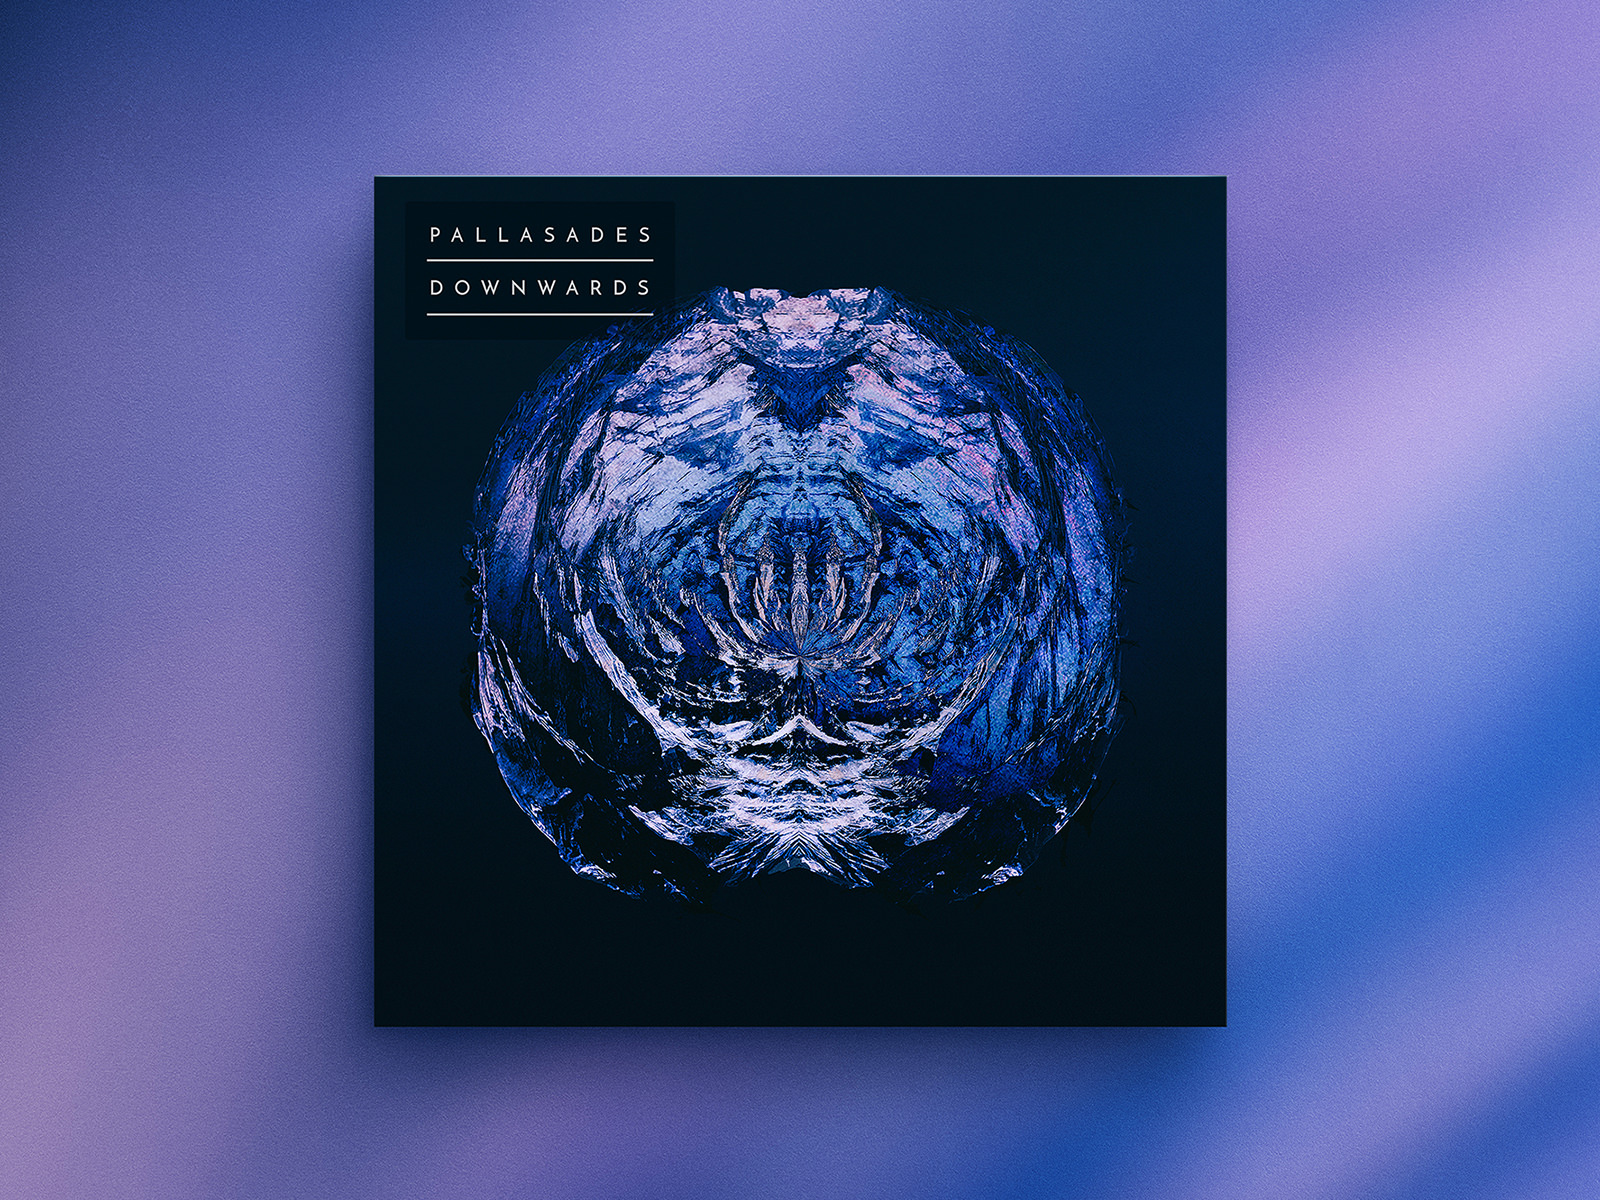 Single cover art for “Downwards” by Pallasades. Designed by Herm the Younger.